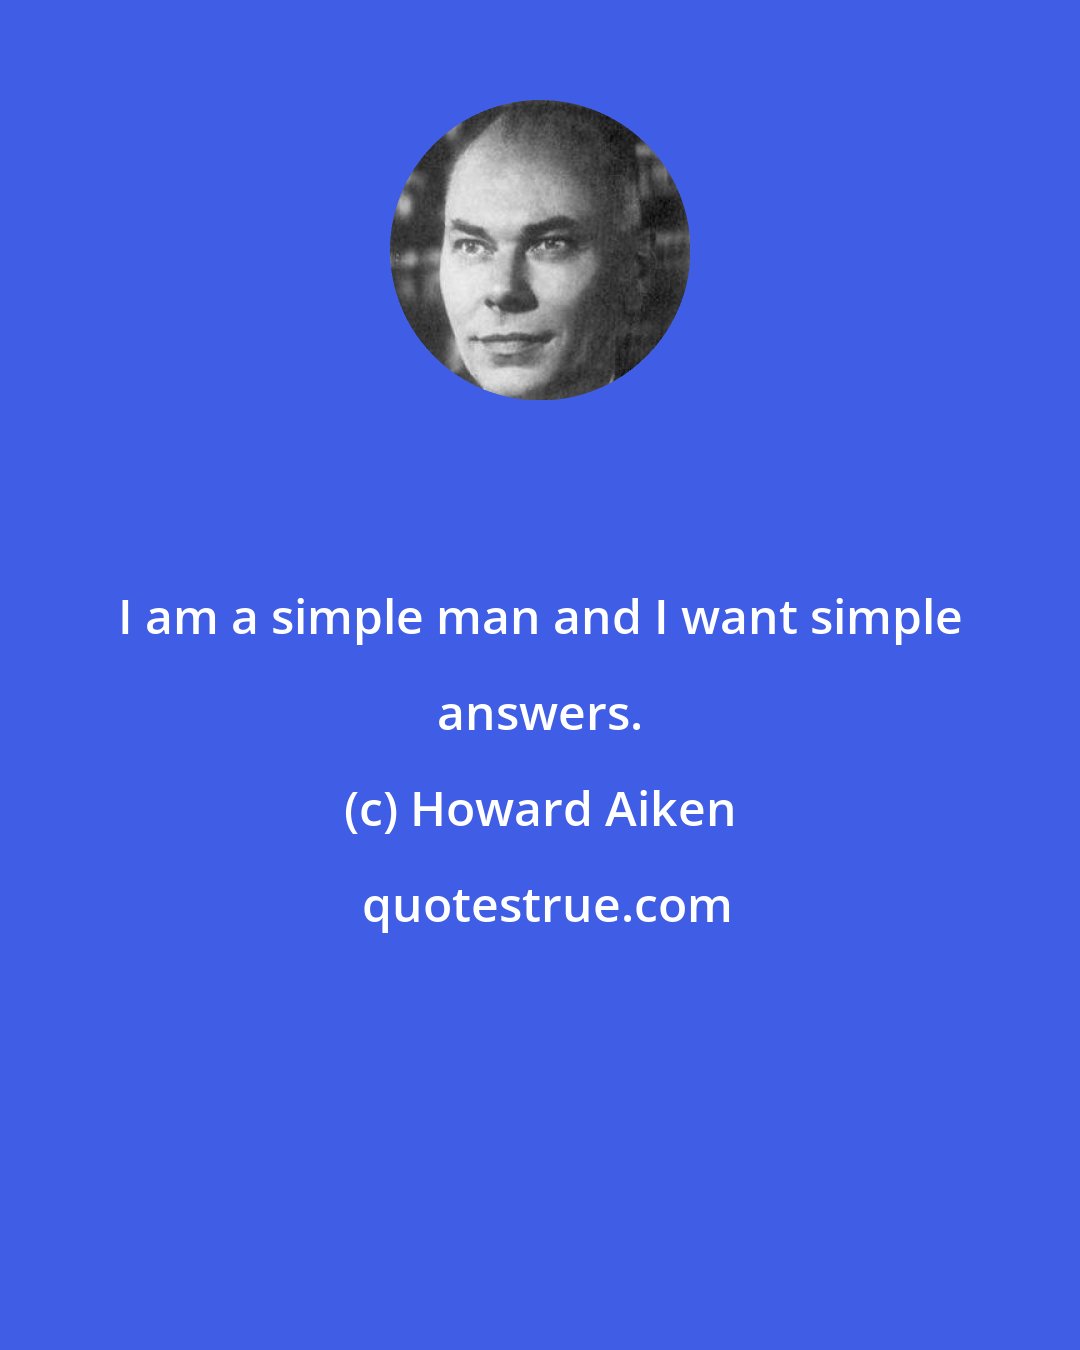 Howard Aiken: I am a simple man and I want simple answers.